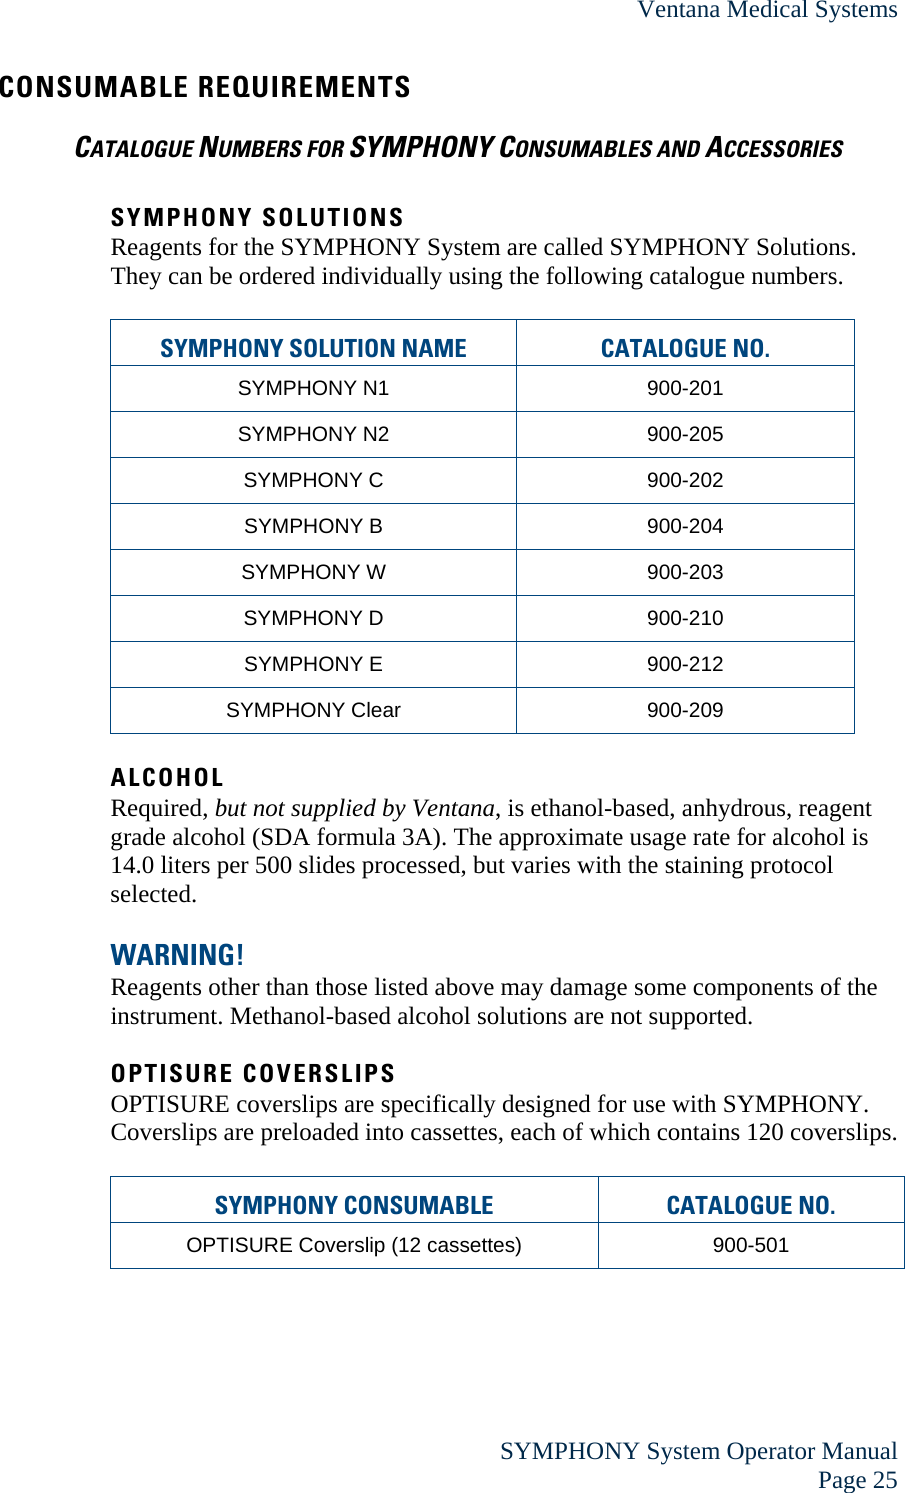 Ventana Medical Systems  SYMPHONY System Operator Manual Page 25 CONSUMABLE REQUIREMENTS CATALOGUE NUMBERS FOR SYMPHONY CONSUMABLES AND ACCESSORIES  SYMPHONY SOLUTIONS Reagents for the SYMPHONY System are called SYMPHONY Solutions. They can be ordered individually using the following catalogue numbers.  SYMPHONY SOLUTION NAME  CATALOGUE NO. SYMPHONY N1  900-201 SYMPHONY N2  900-205 SYMPHONY C  900-202 SYMPHONY B  900-204 SYMPHONY W  900-203 SYMPHONY D  900-210 SYMPHONY E  900-212 SYMPHONY Clear  900-209  ALCOHOL Required, but not supplied by Ventana, is ethanol-based, anhydrous, reagent grade alcohol (SDA formula 3A). The approximate usage rate for alcohol is 14.0 liters per 500 slides processed, but varies with the staining protocol selected.   WARNING! Reagents other than those listed above may damage some components of the instrument. Methanol-based alcohol solutions are not supported.  OPTISURE COVERSLIPS OPTISURE coverslips are specifically designed for use with SYMPHONY. Coverslips are preloaded into cassettes, each of which contains 120 coverslips.  SYMPHONY CONSUMABLE  CATALOGUE NO. OPTISURE Coverslip (12 cassettes)  900-501  